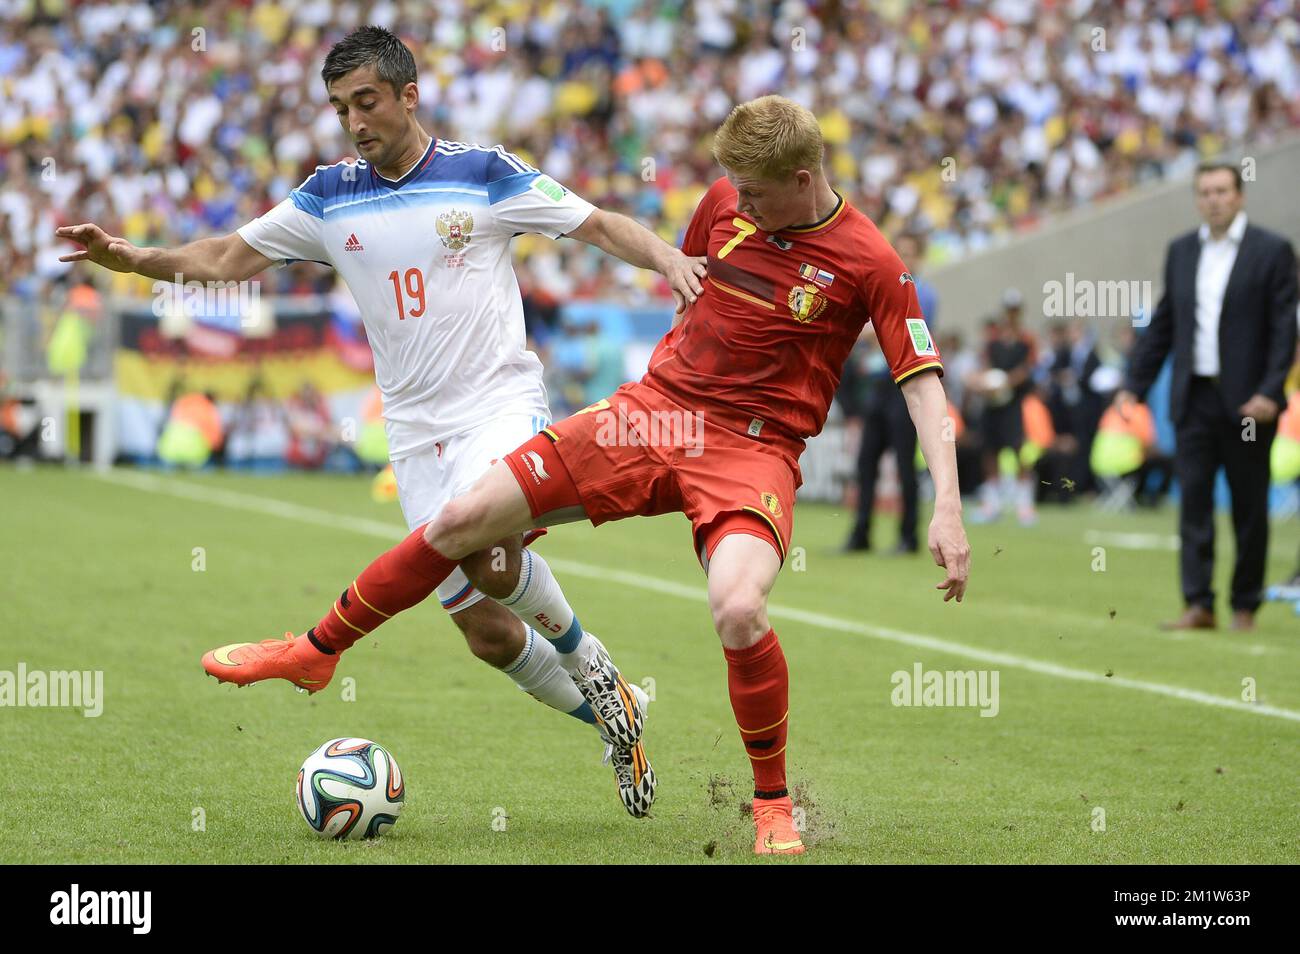 20140622 - RIO DE JANEIRO, BRAZIL: Russia's Aleksandr Samedov and Belgium's Kevin De Bruyne in action during a soccer game between Belgian national team The Red Devils and Russia in Rio de Janeiro, Brazil, the second game in Group H of the first round of the 2014 FIFA World Cup, Sunday 22 June 2014.   BELGA PHOTO DIRK WAEM Stock Photo